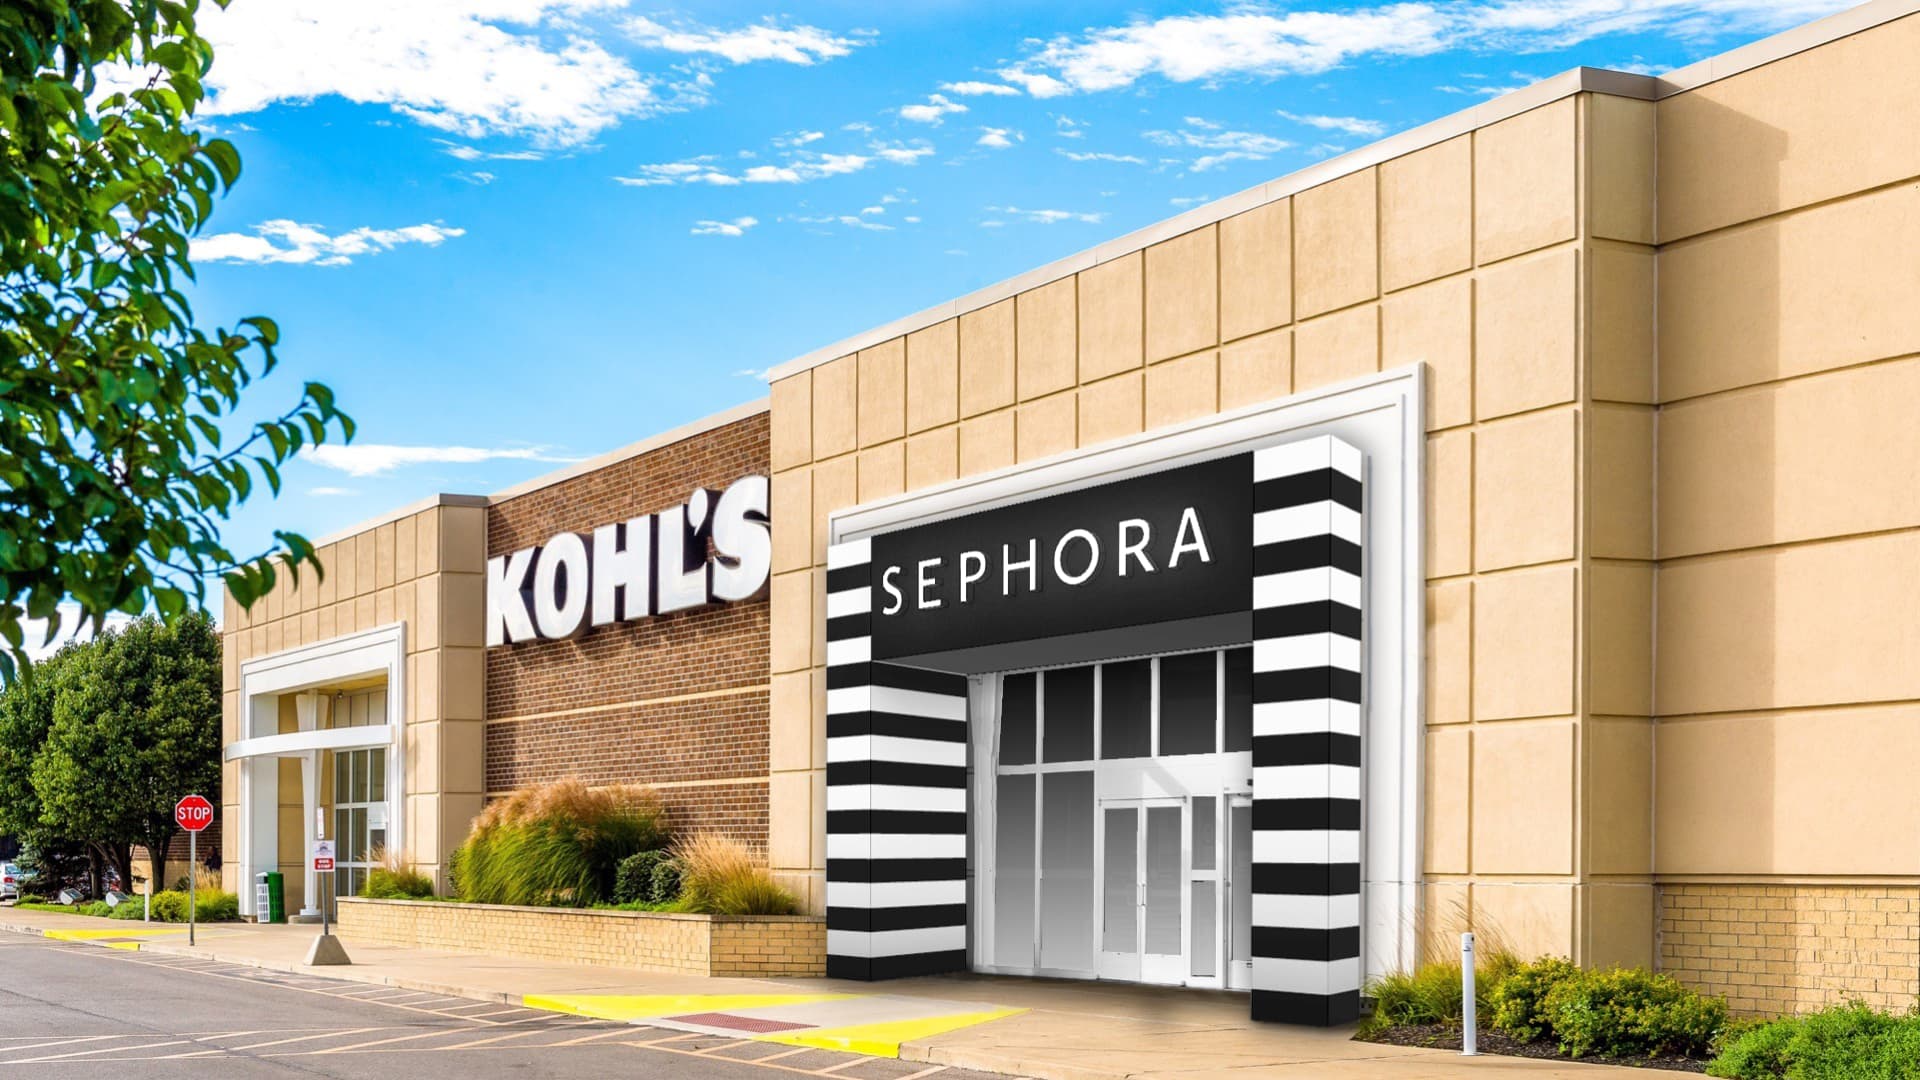 CT Kohl's and Target see success from beauty partnerships, kohl's 